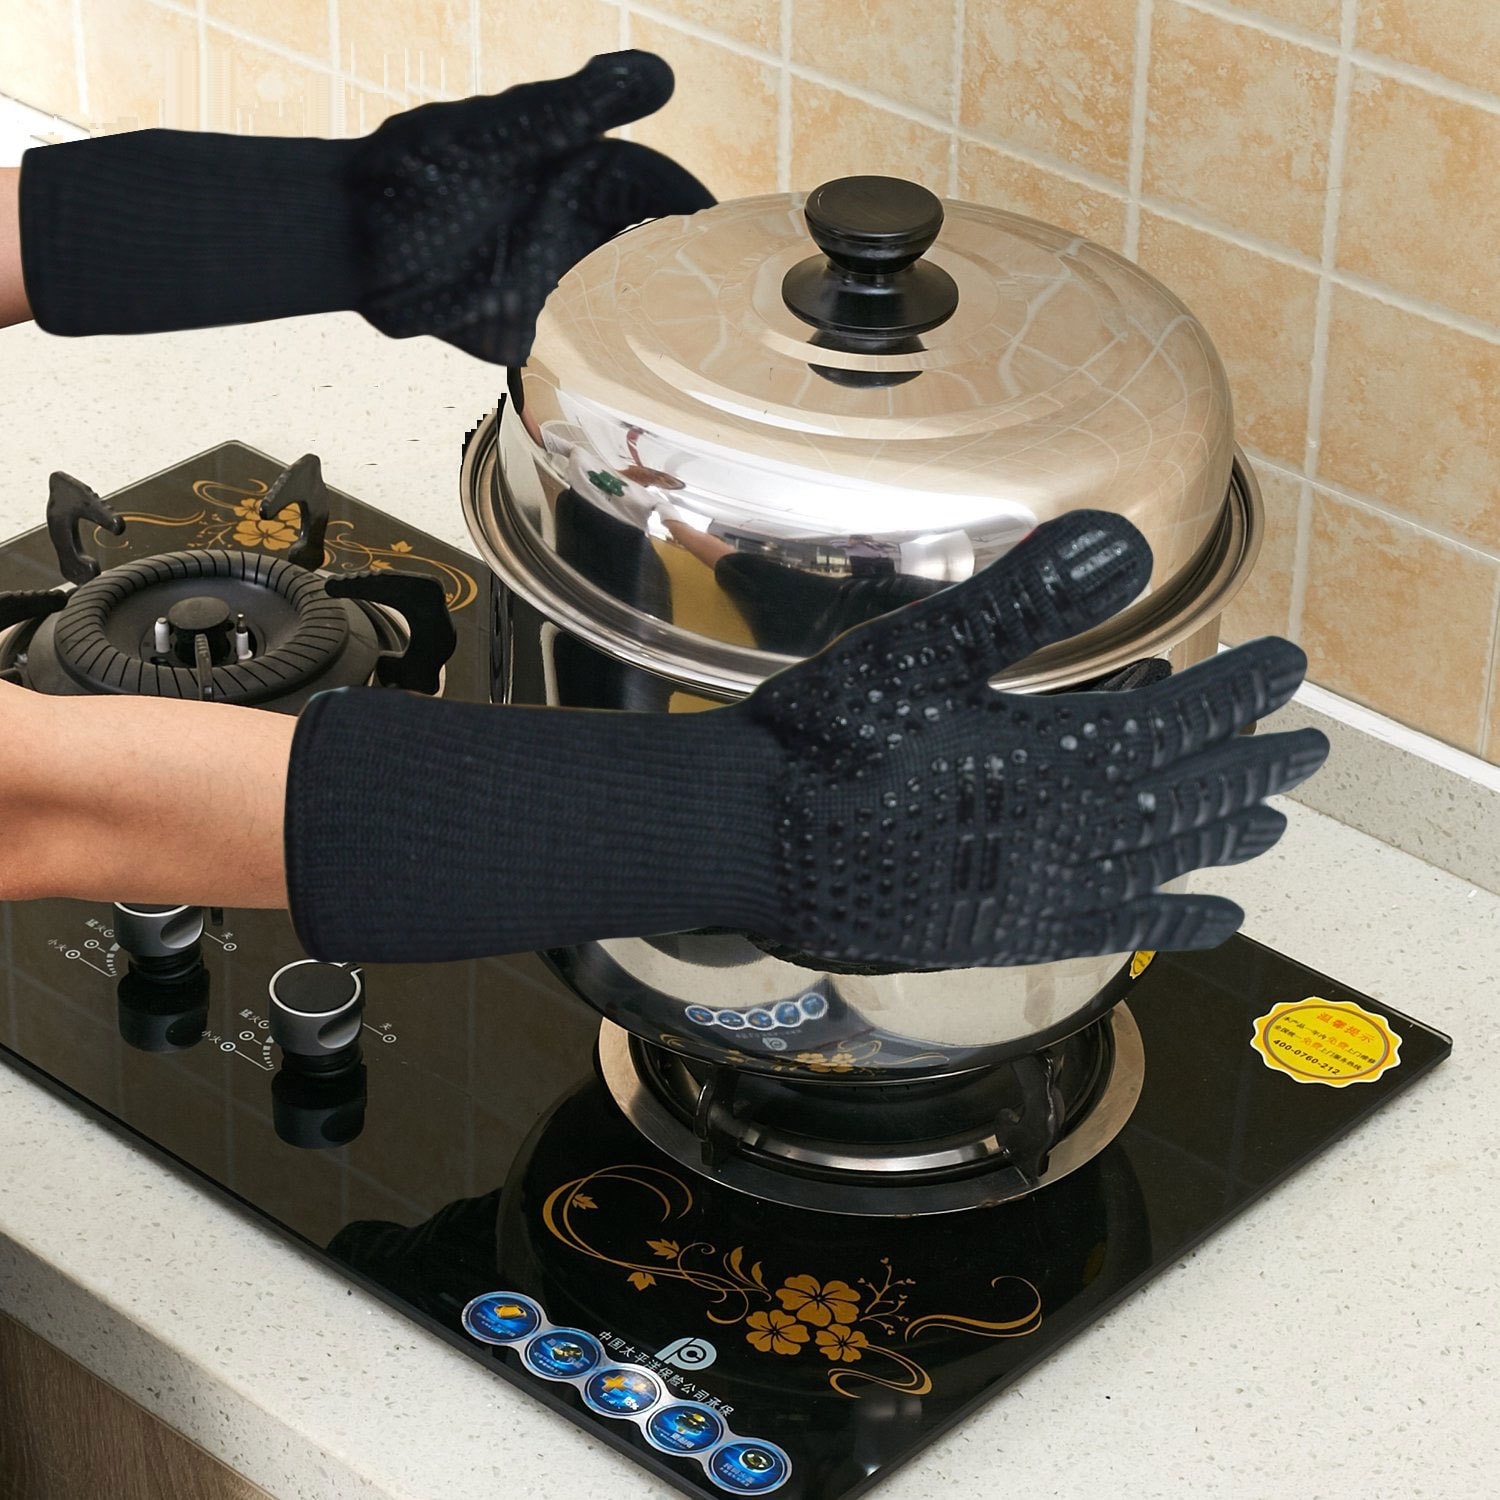 https://ak1.ostkcdn.com/images/products/is/images/direct/00466b779e112b6b037aed94f8a431f559c5d7a0/BBQ-Grill-Gloves-932-F-Extreme-Heat-Resistant-Oven-Gloves.jpg